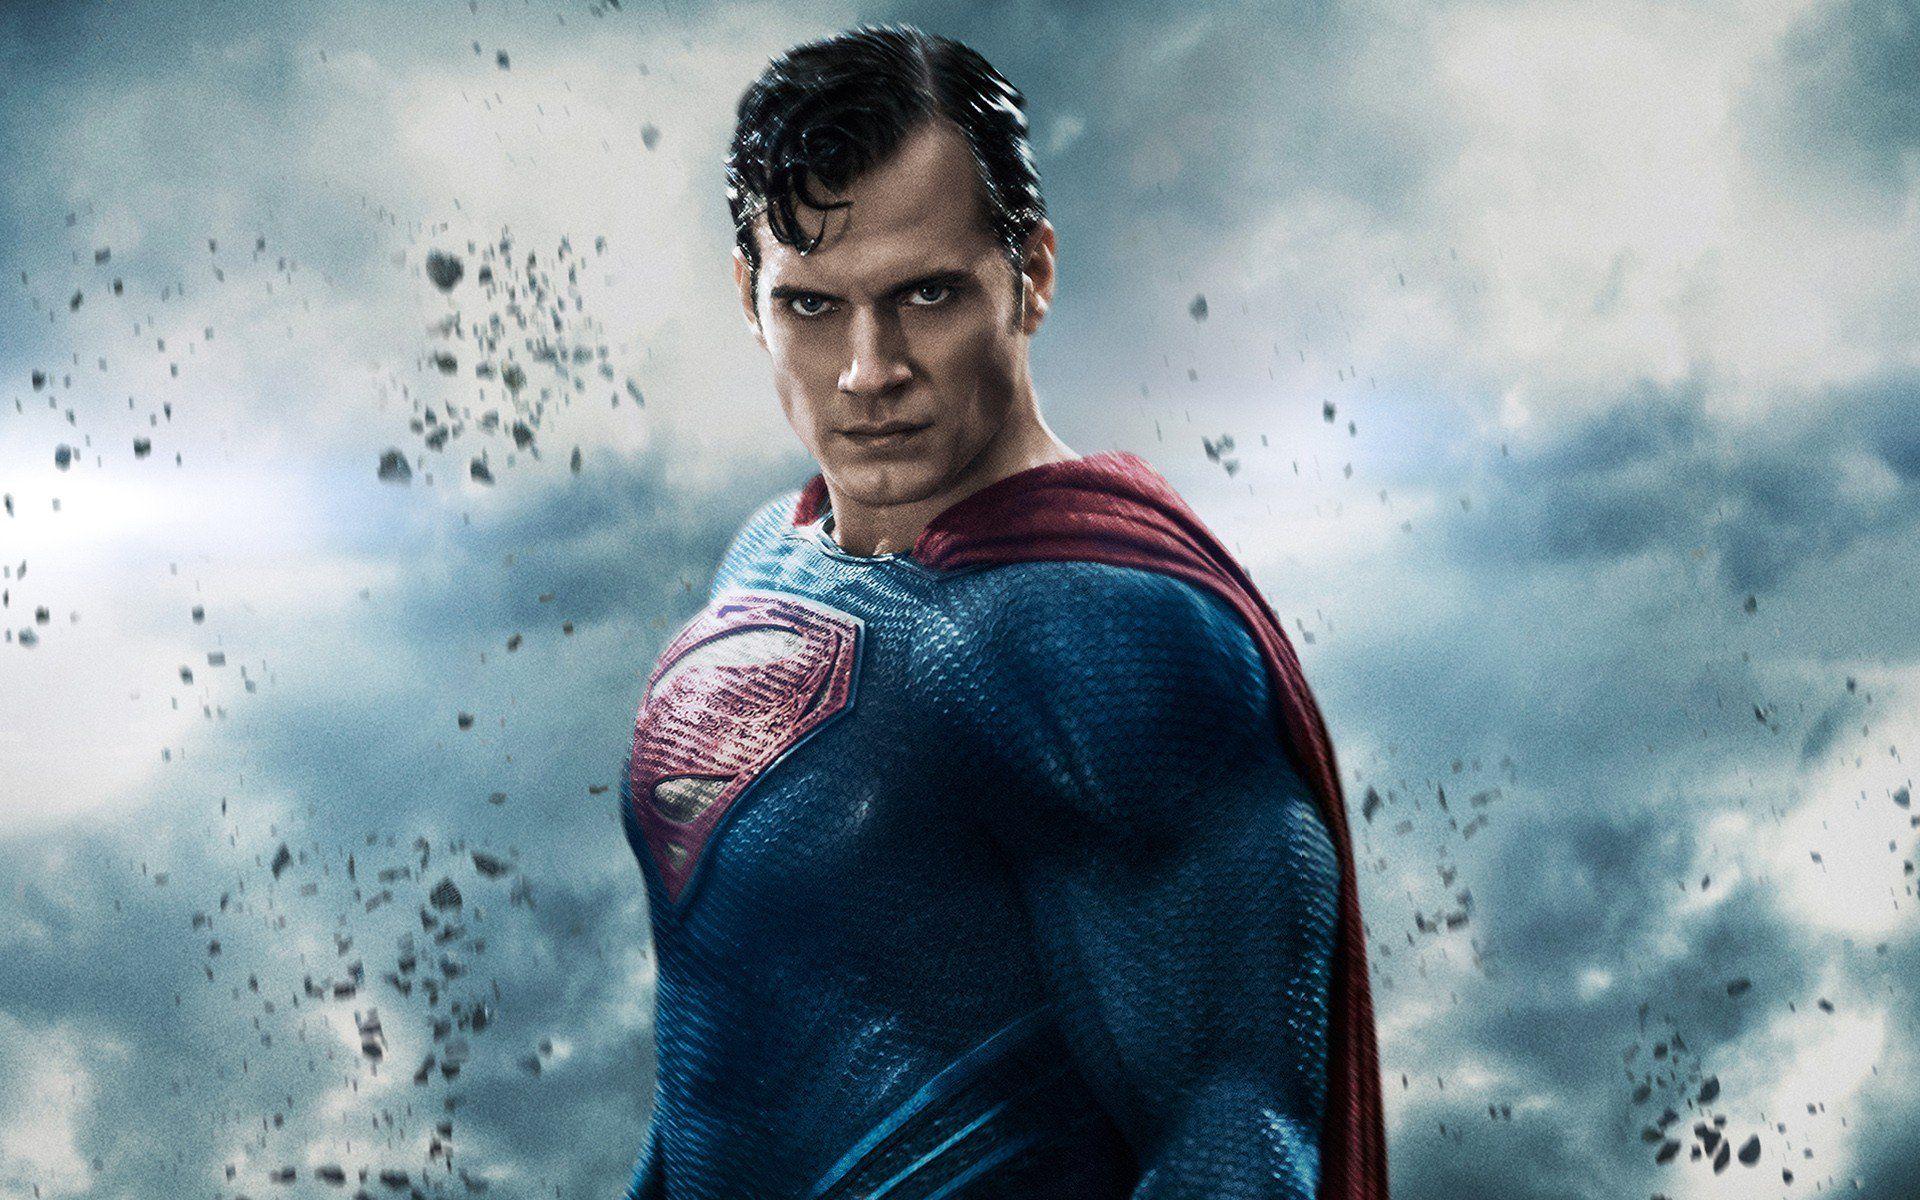 Henry Cavill&;s Manager Confirms New Solo Superman Movie